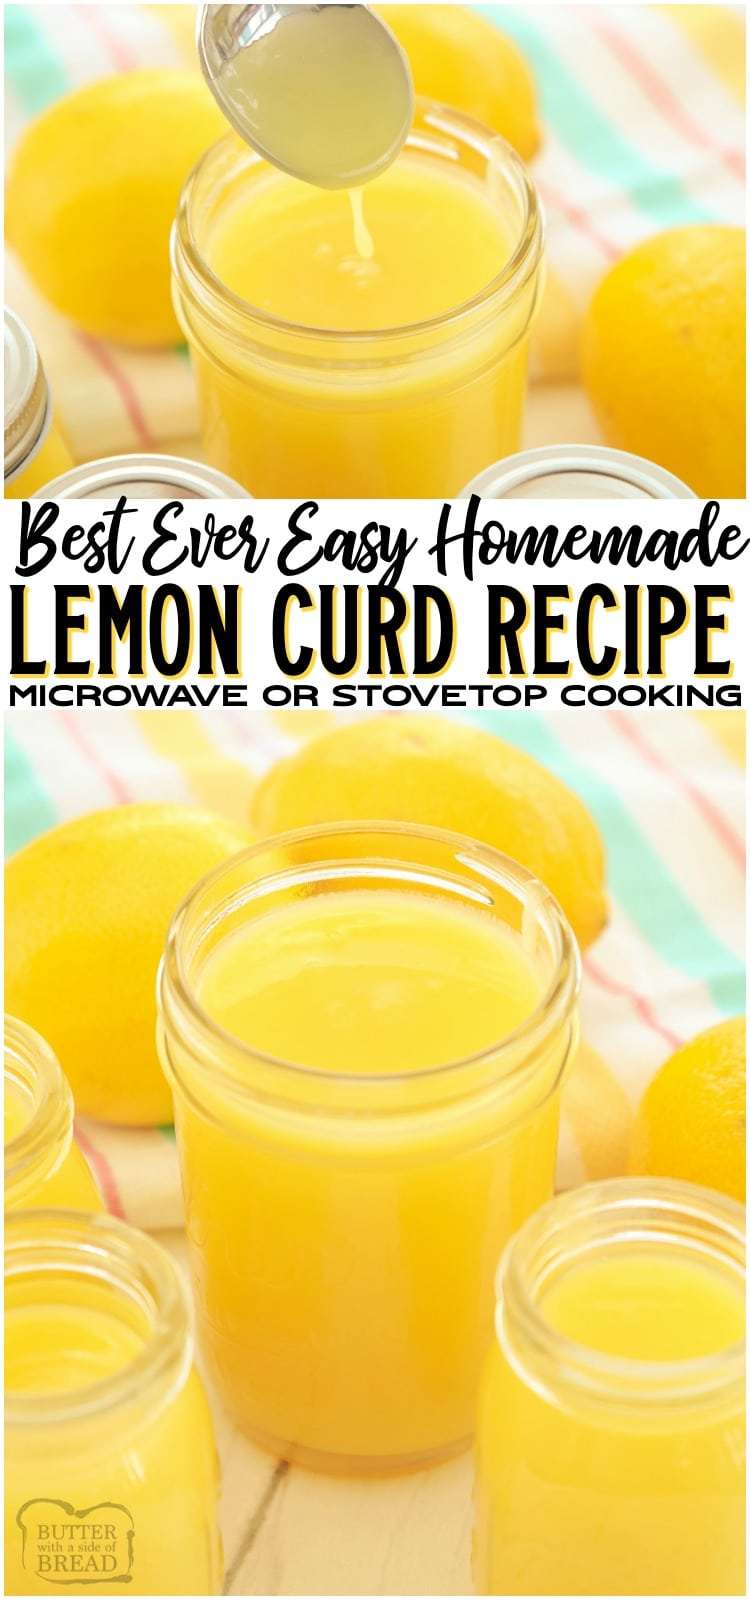 Lemon curd is an incredibly delicious and thick citrus packed filling or spread. It’s vibrant yellow color and tangy lemon taste makes it a great addition to many recipes. #lemons #lemoncurd #curd #homemade #microwave #stovetop #dessert #lemonzest #recipe from BUTTER WITH A SIDE OF BREAD